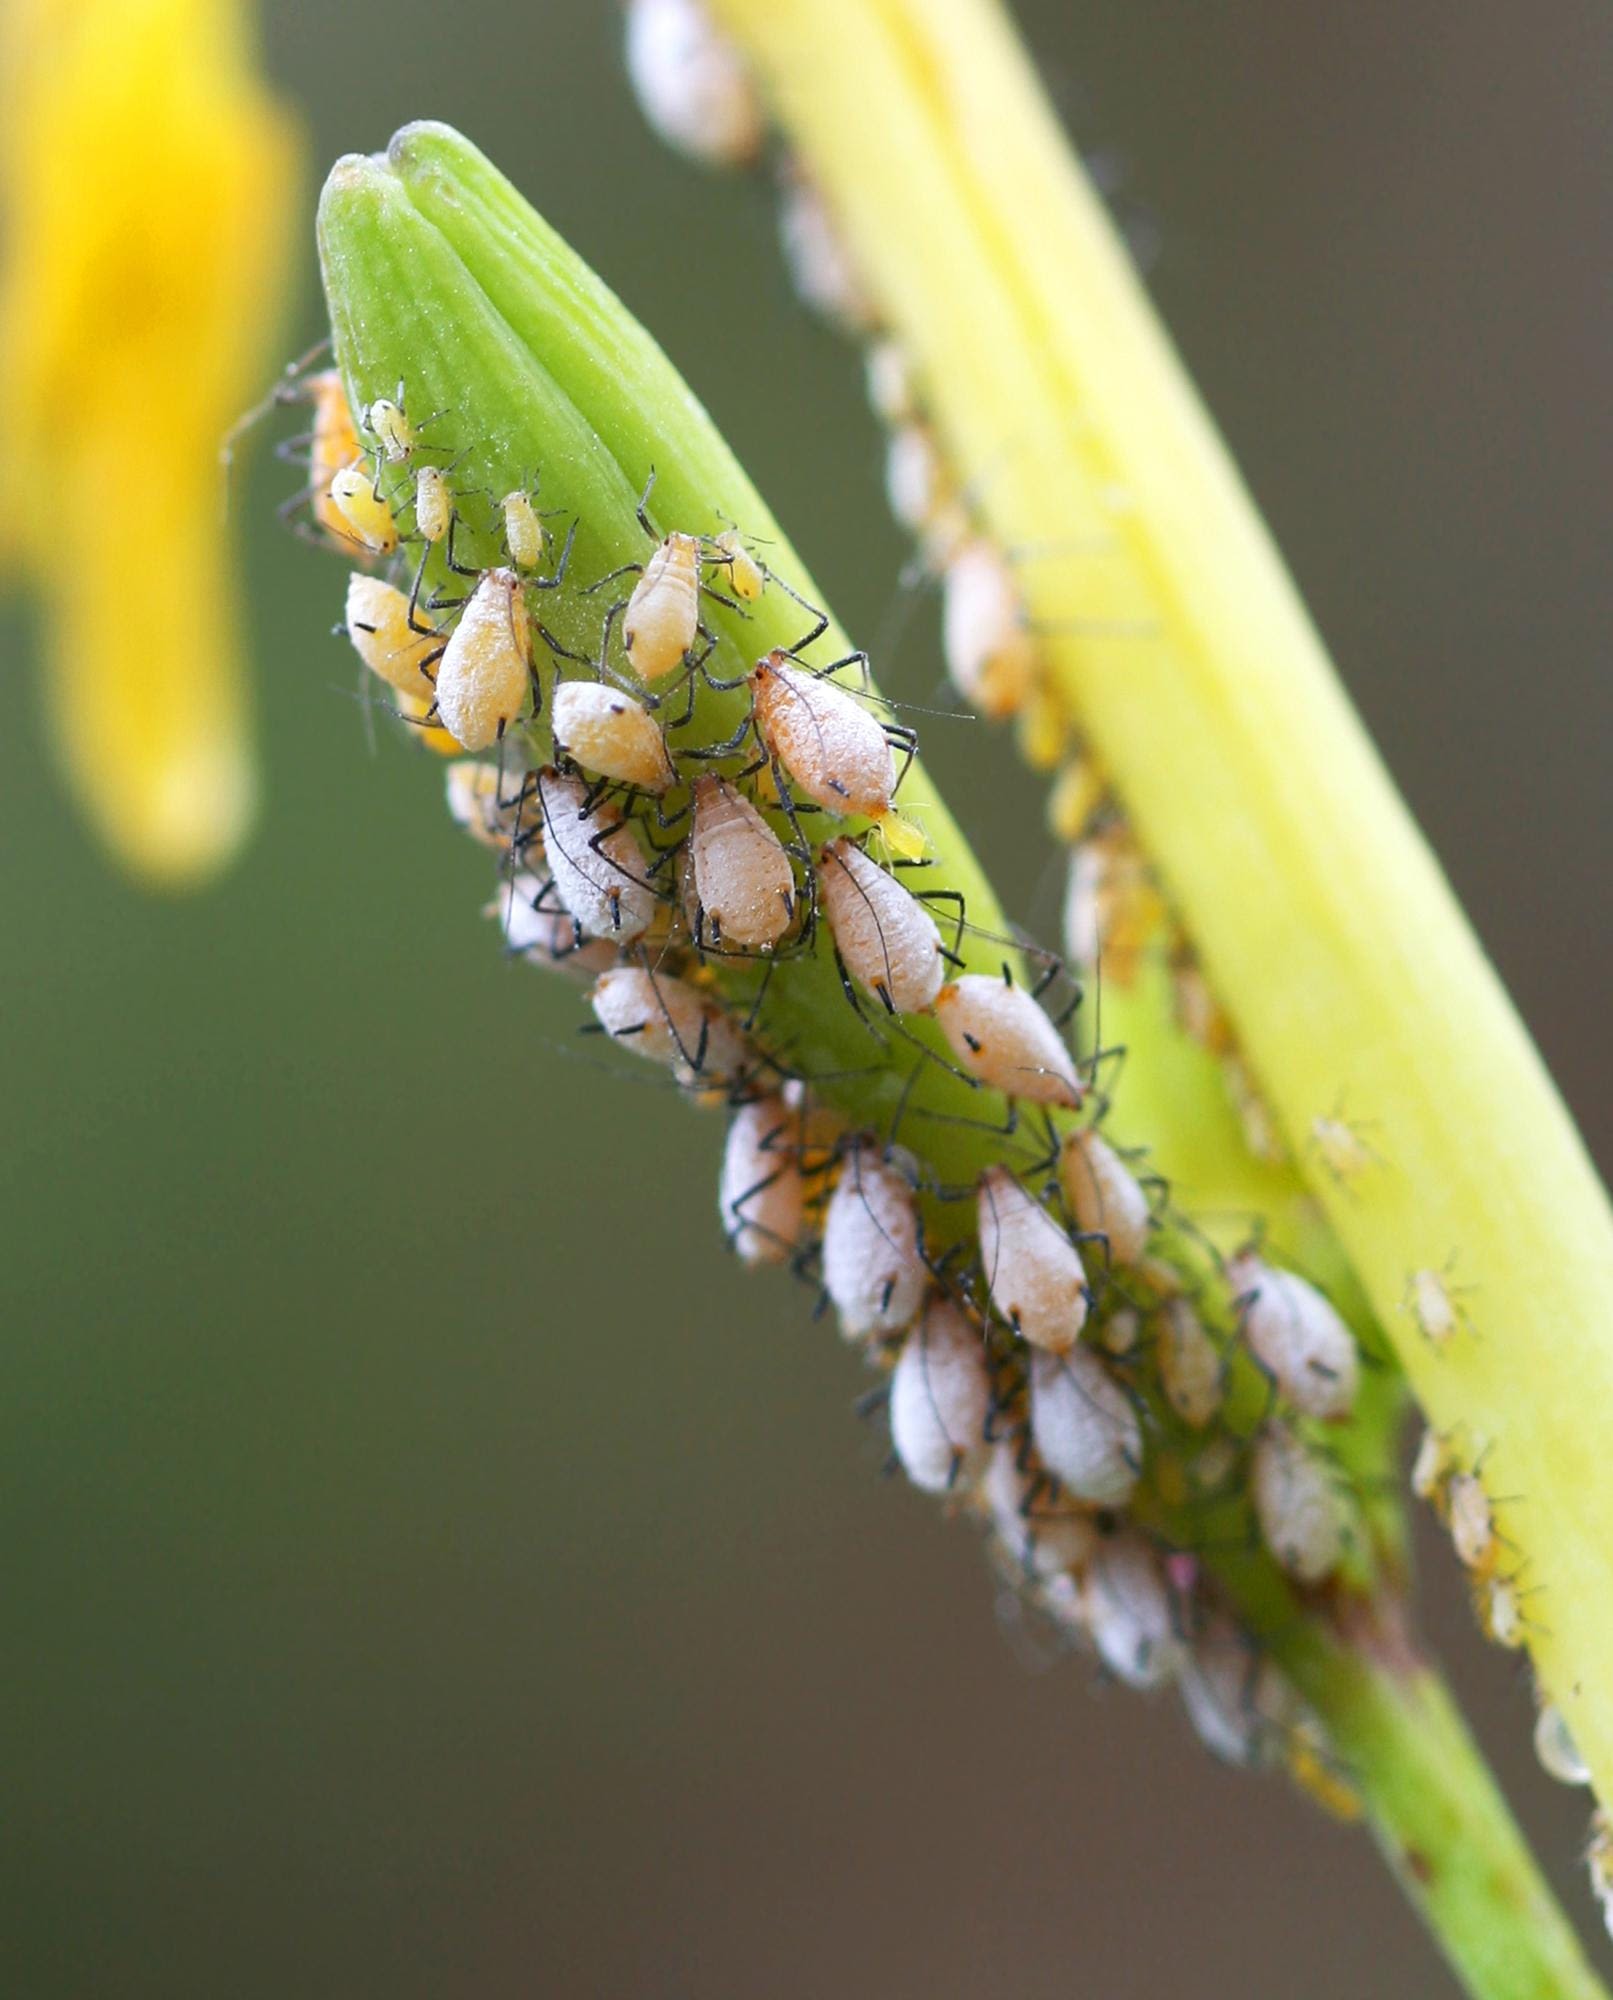 Aphids in your garden? Here is what to know